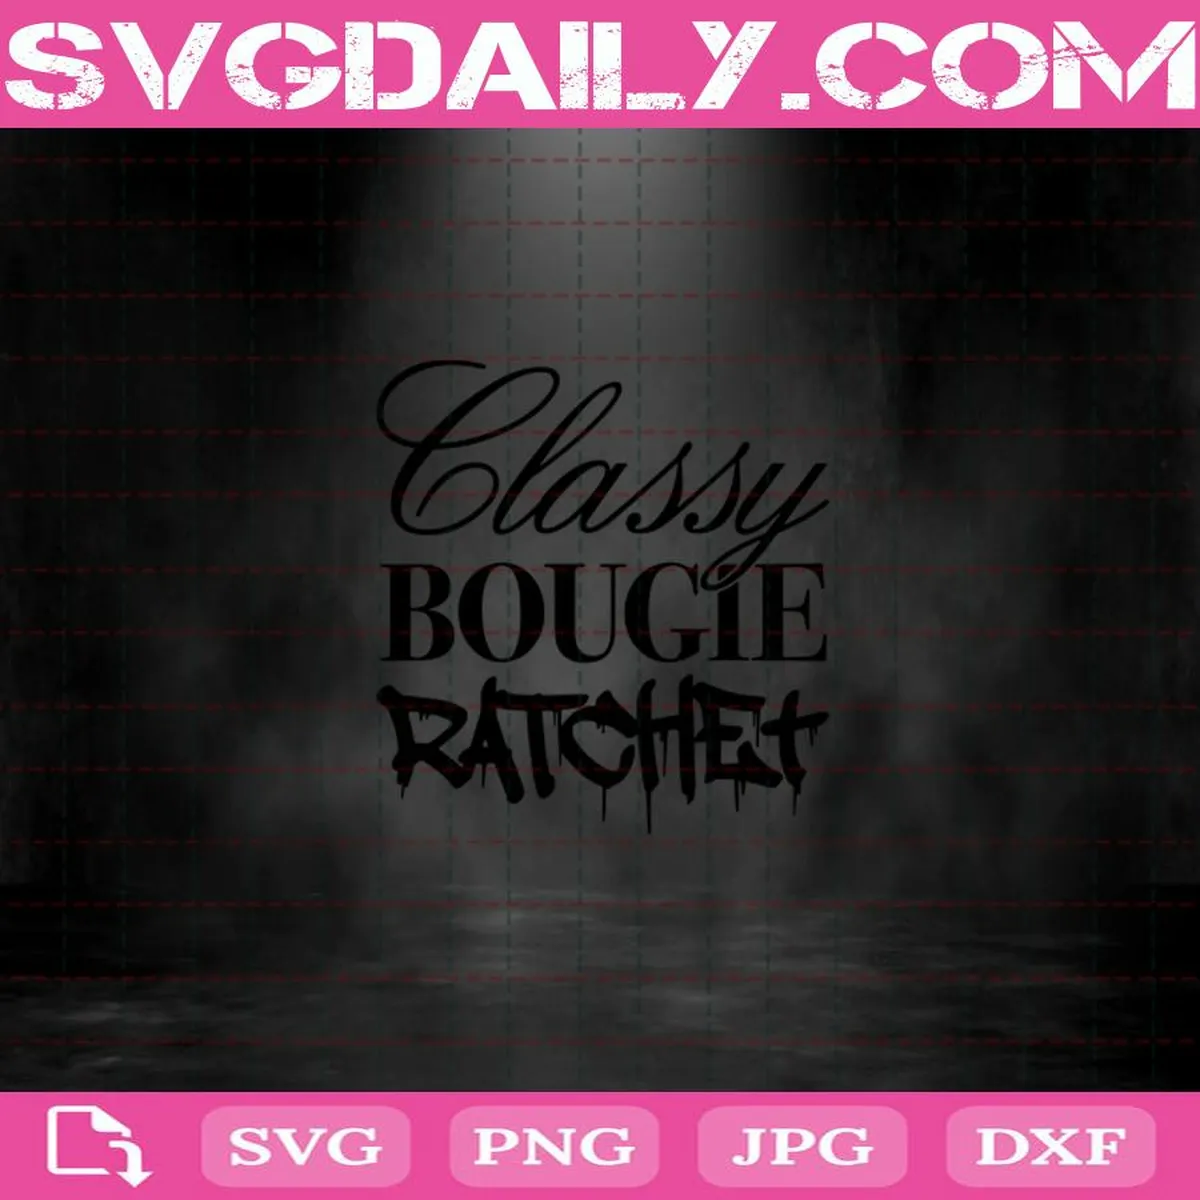 Classy Bougie Ratchet Svg, Ratchet Svg, Classy Bougie Files For Silhouette, Files For Cricut Svg Dxf Eps Png Instant Download